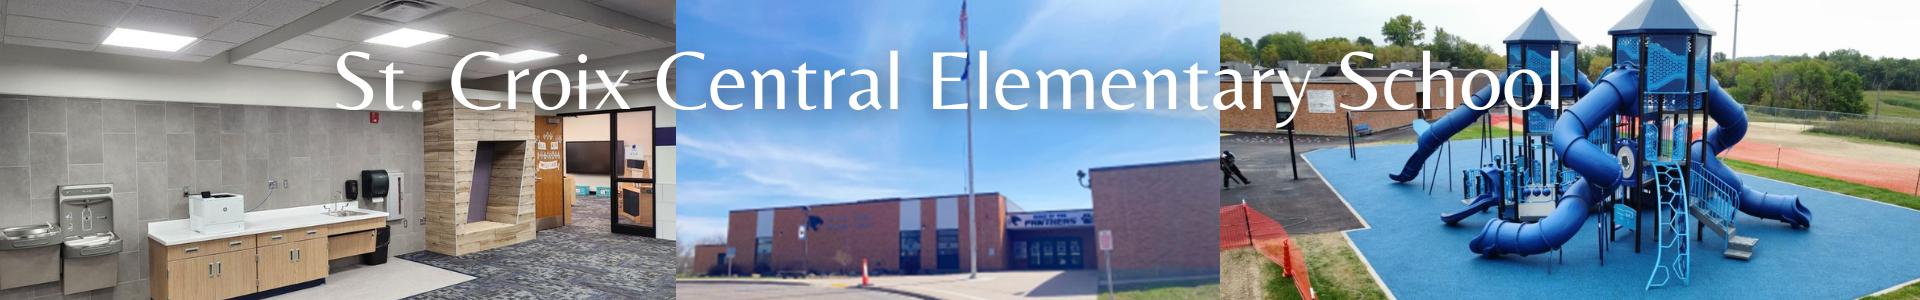 St Croix Central Elementary School